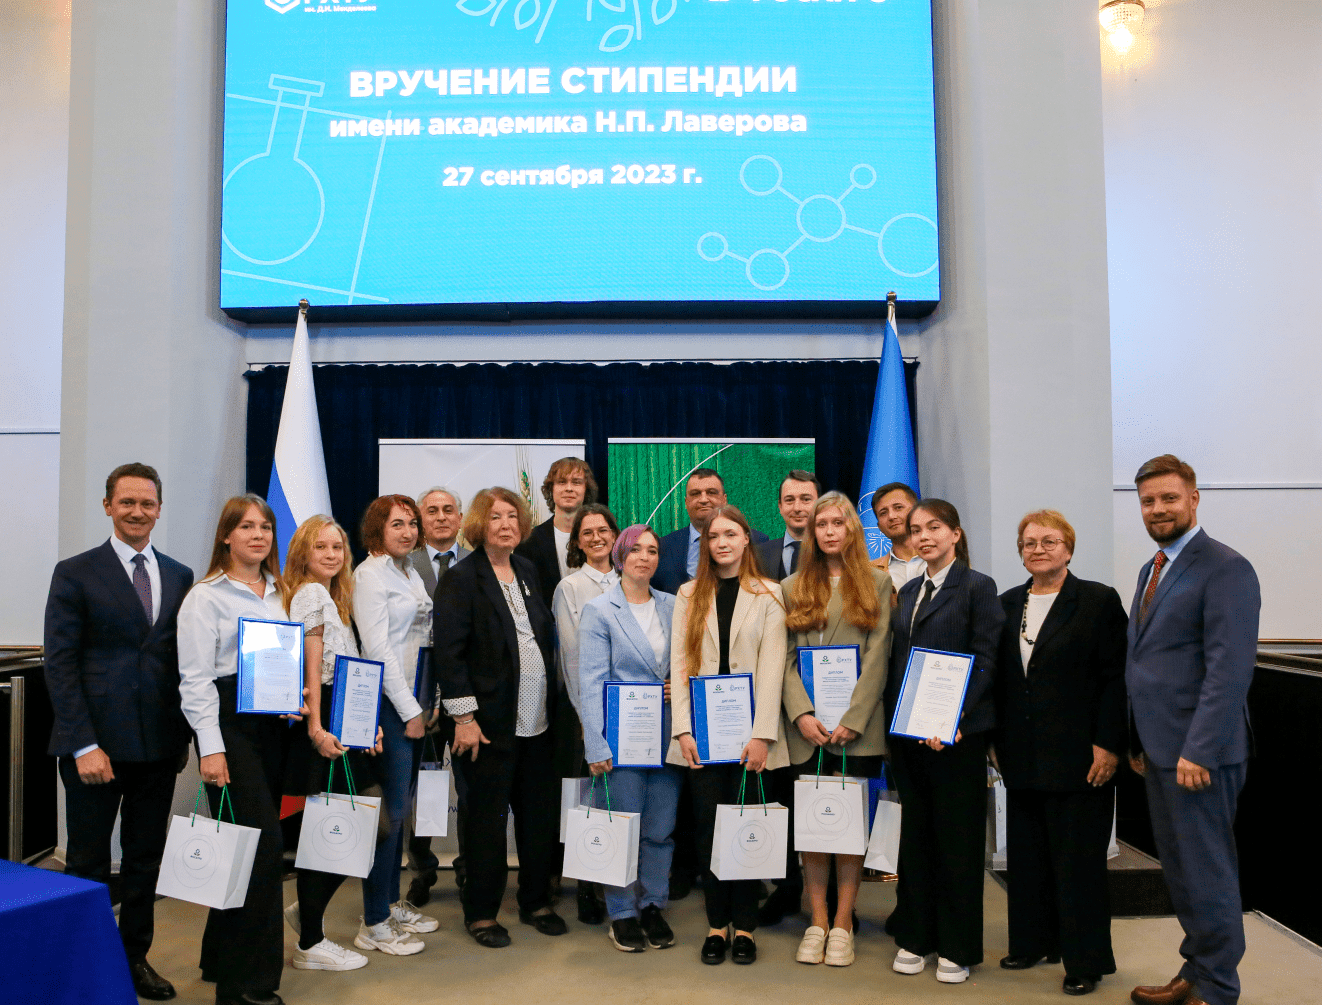 The winners of the fourth Laverov Scholarships competition